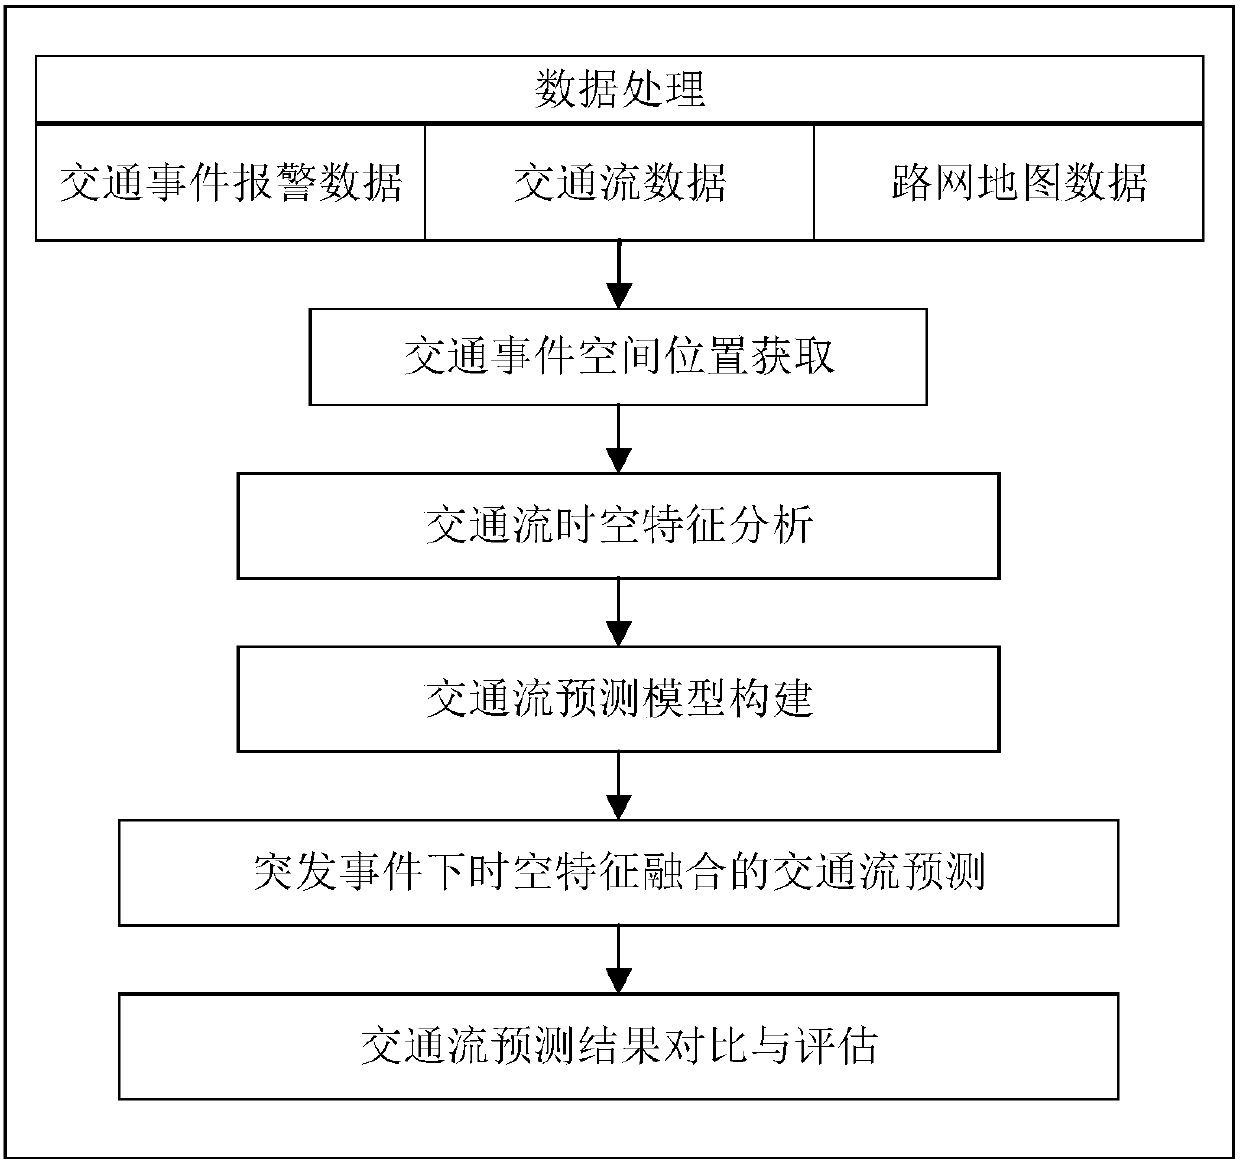 Method for road traffic flow prediction under suddenly occurred traffic event